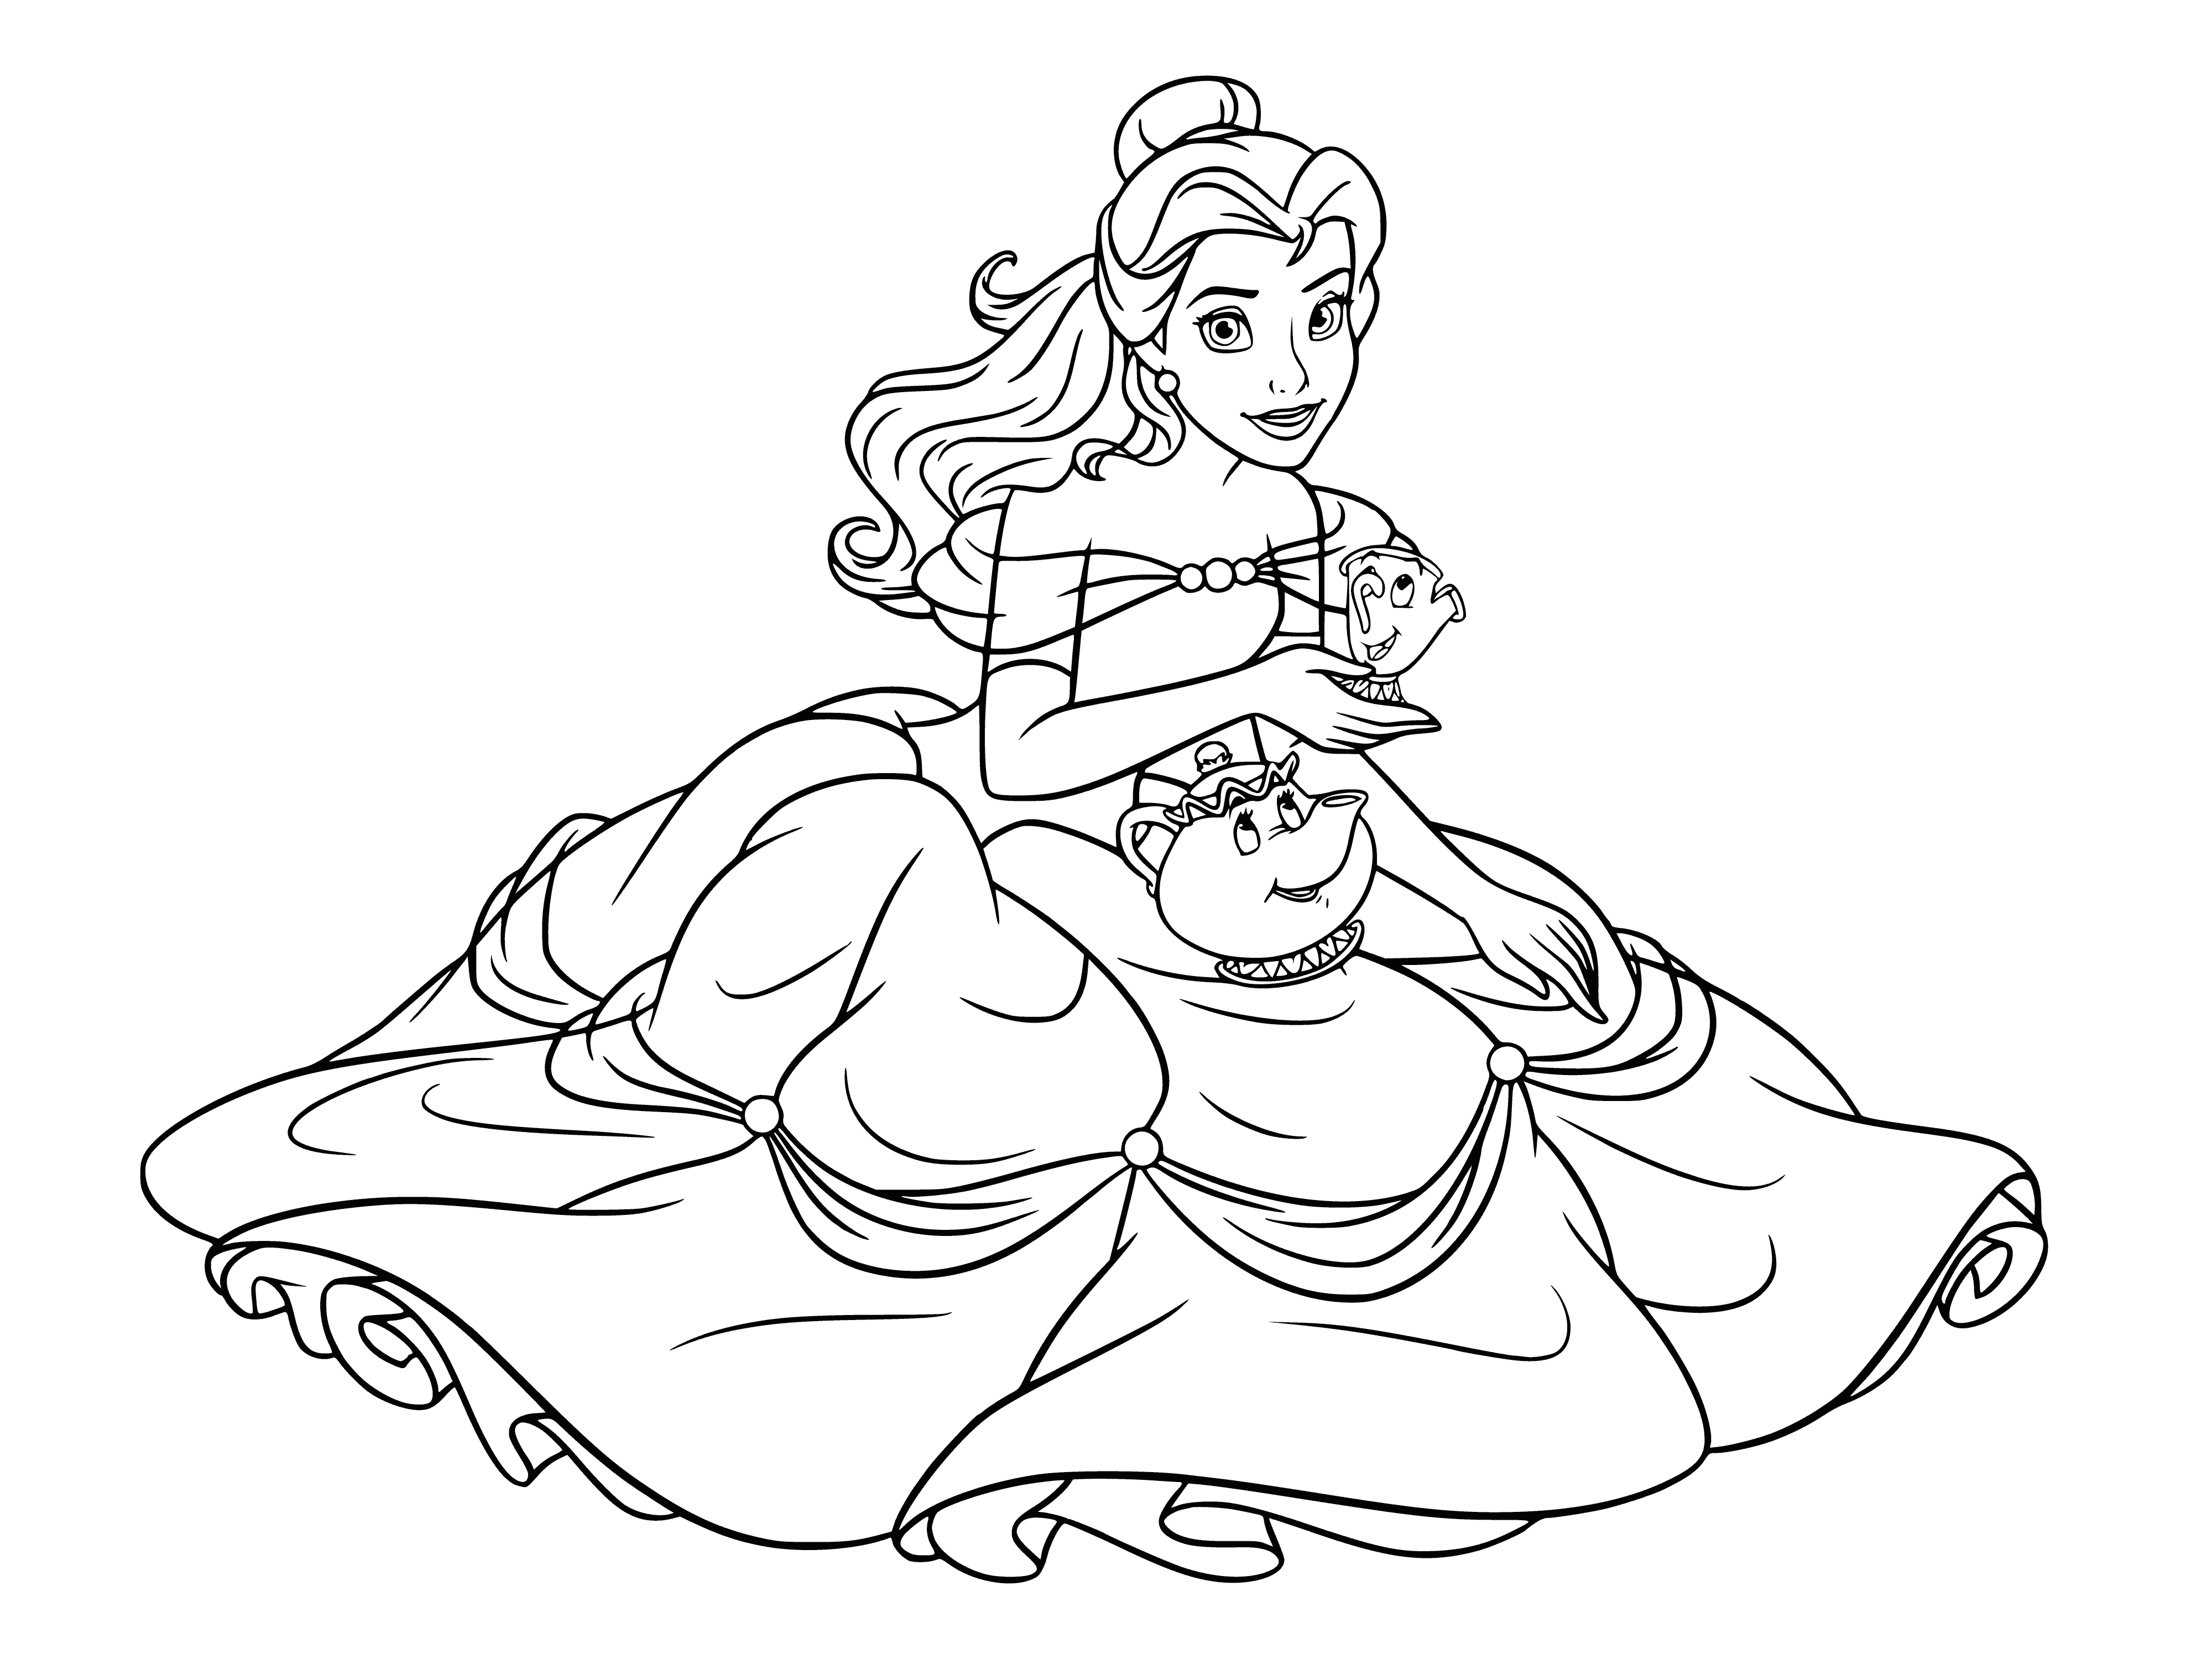 coloring page: Belle, in a yellow dress, and Mrs. Potts & Chip, the teapot & teacup, are in a coloring page. Mrs. Potts & Chip are white with blue designs.